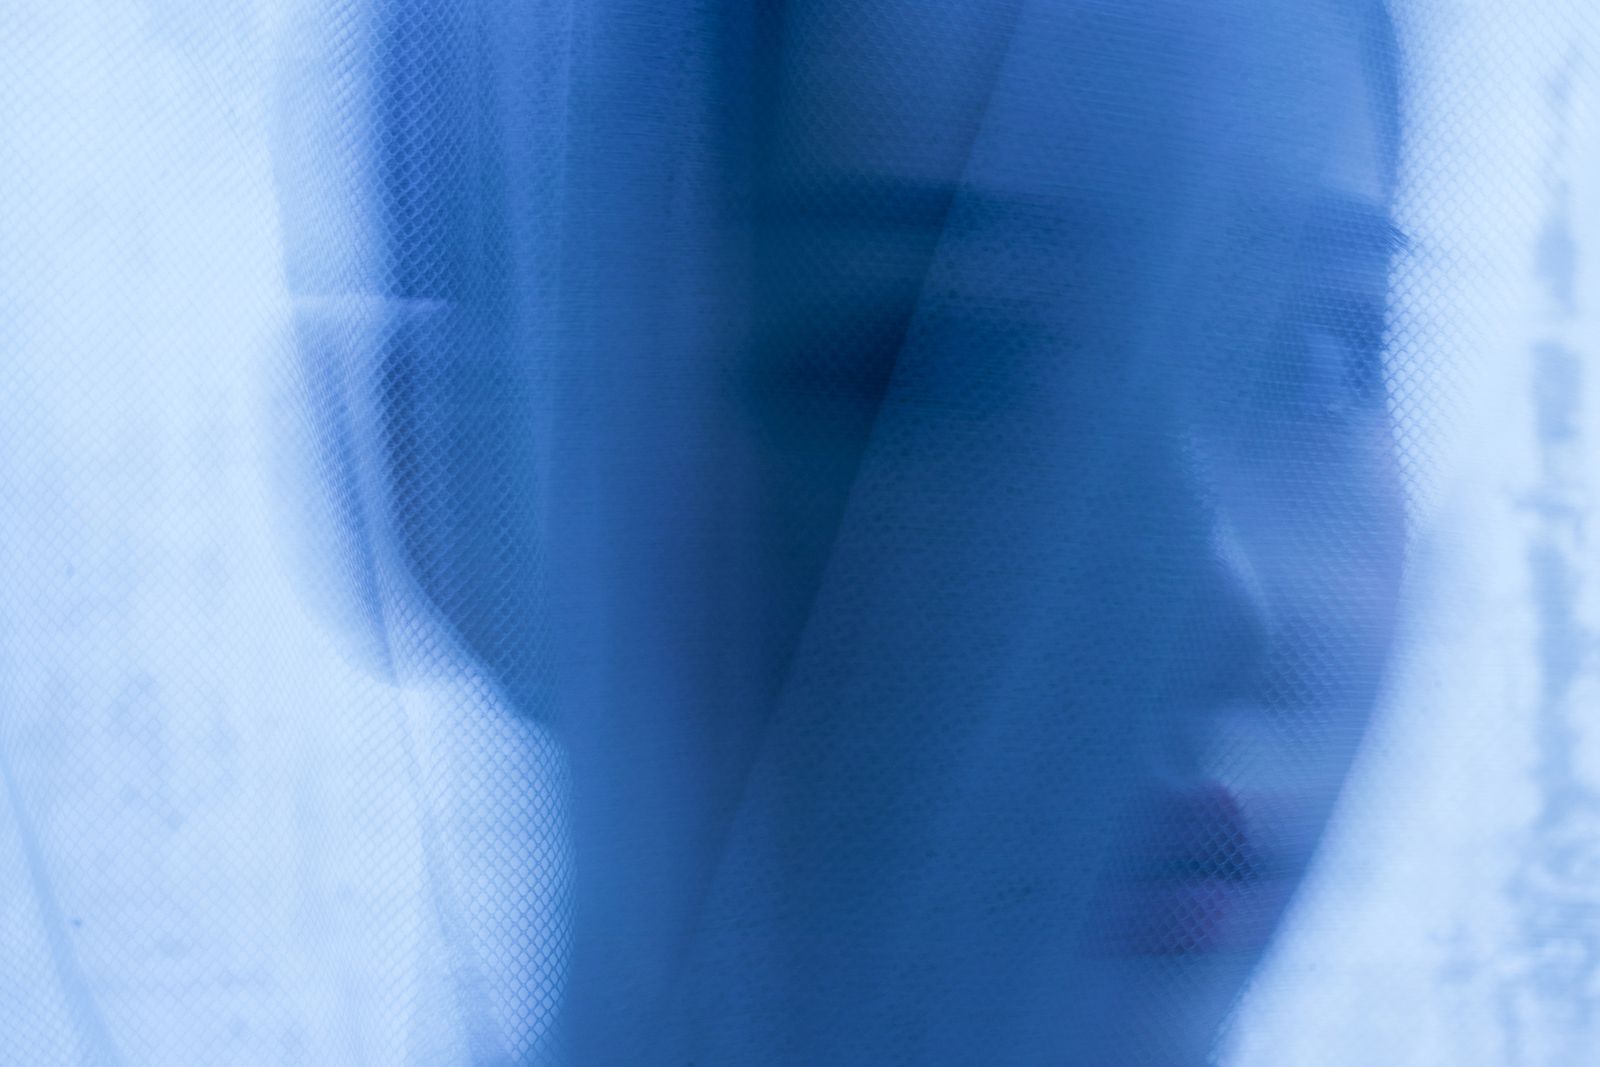 © Ting Miao - Image from the Into the blue photography project